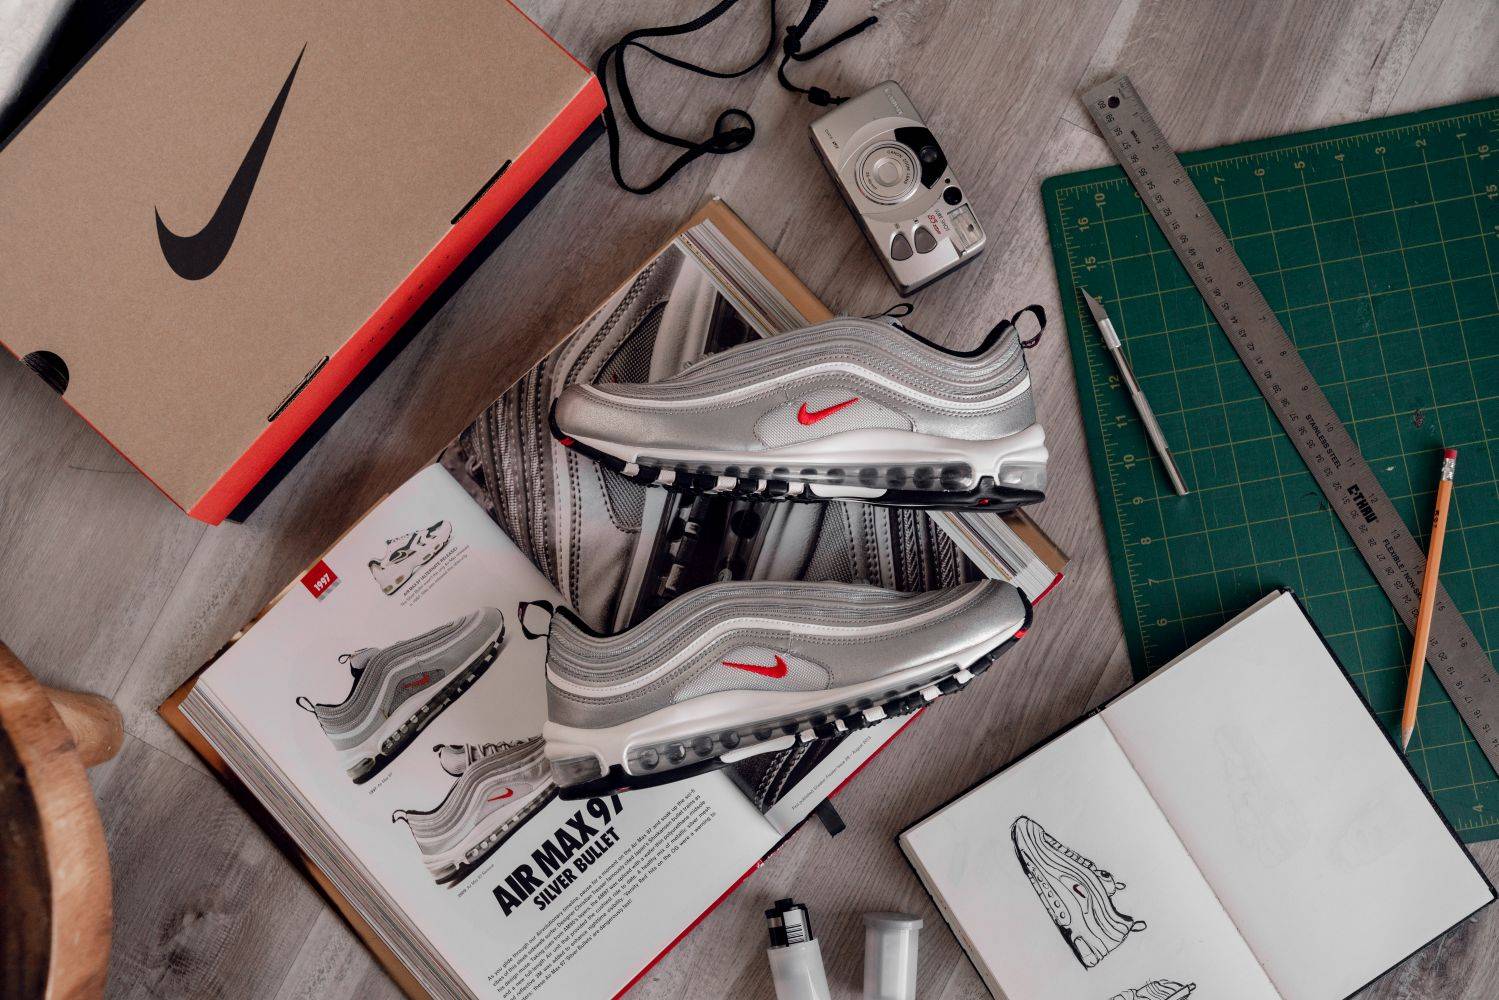 Microprocessor Typically Thunderstorm The Nike Air Max 97 Silver Bullet | Shoe Palace Blog